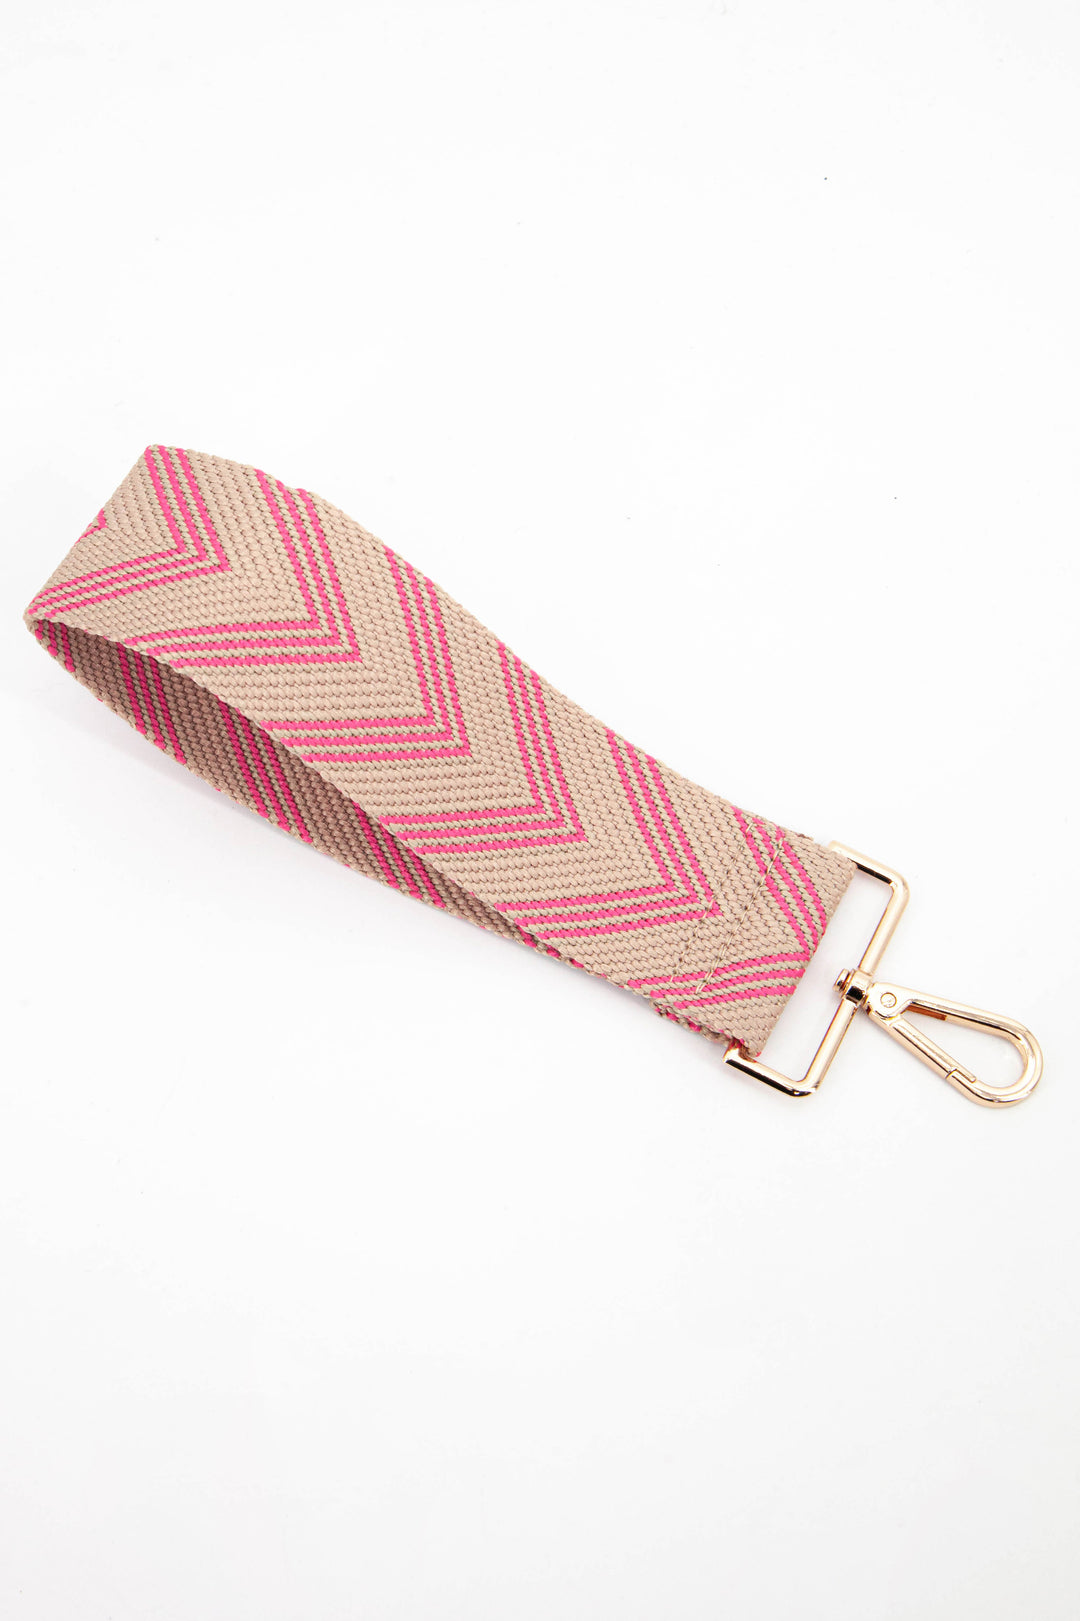 beige and pink chevron striped woven clip on wrist strap with gold hardware